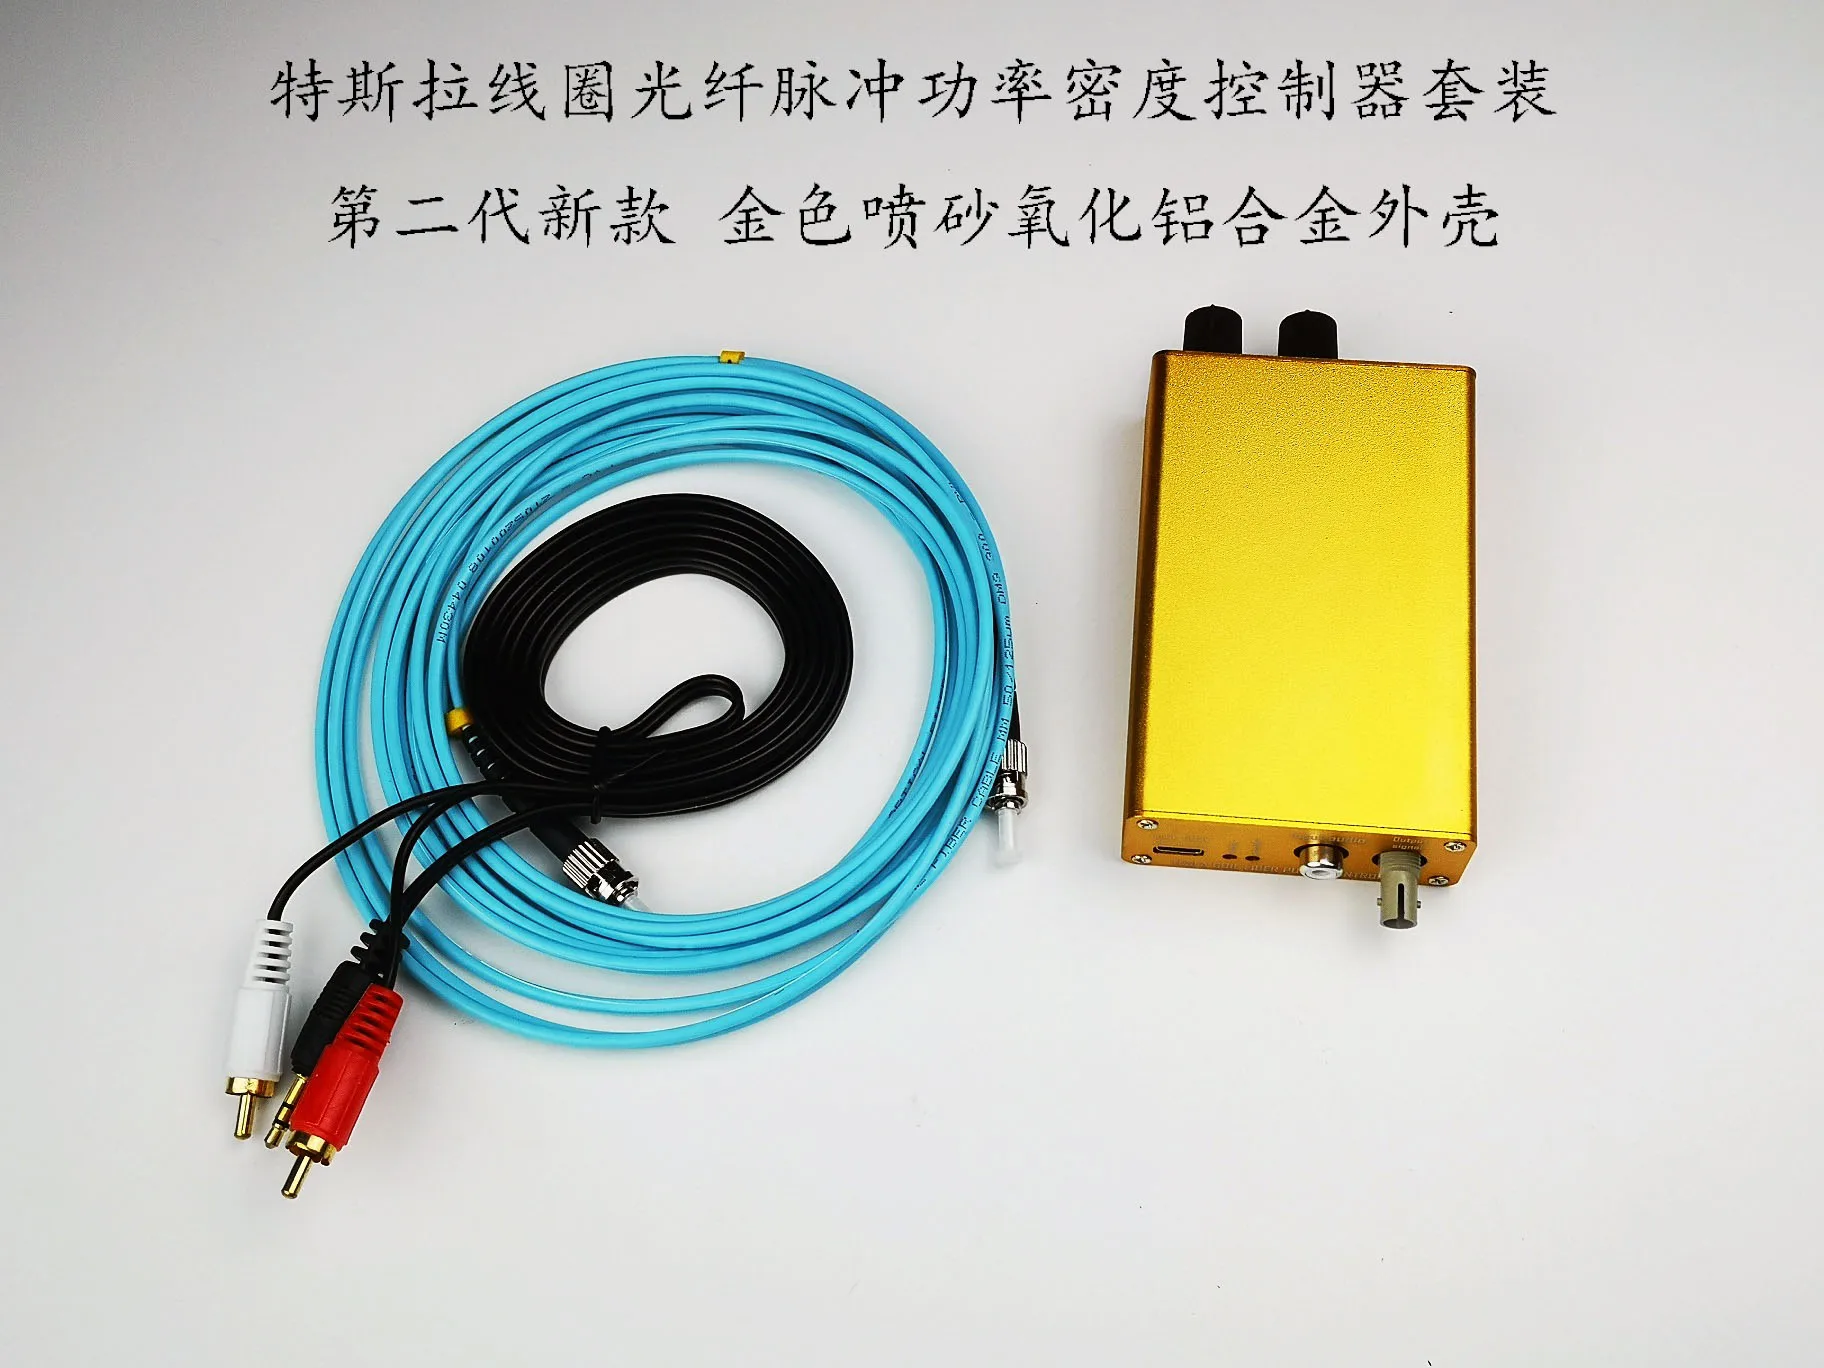 

Tesla coil arc extinguishing DRSSTC special optical fiber controller multifunctional finished music control box